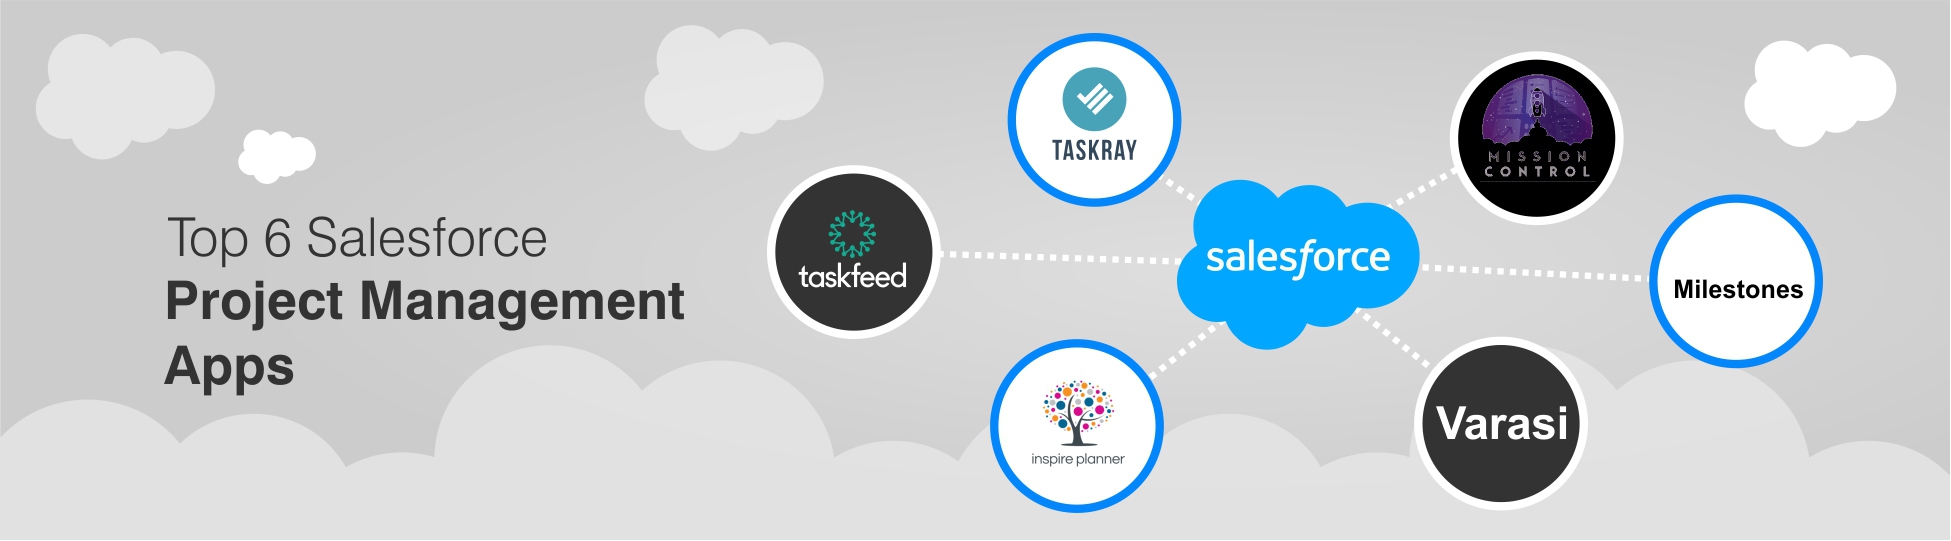 to-6-salesforce-app-for-Project-Management